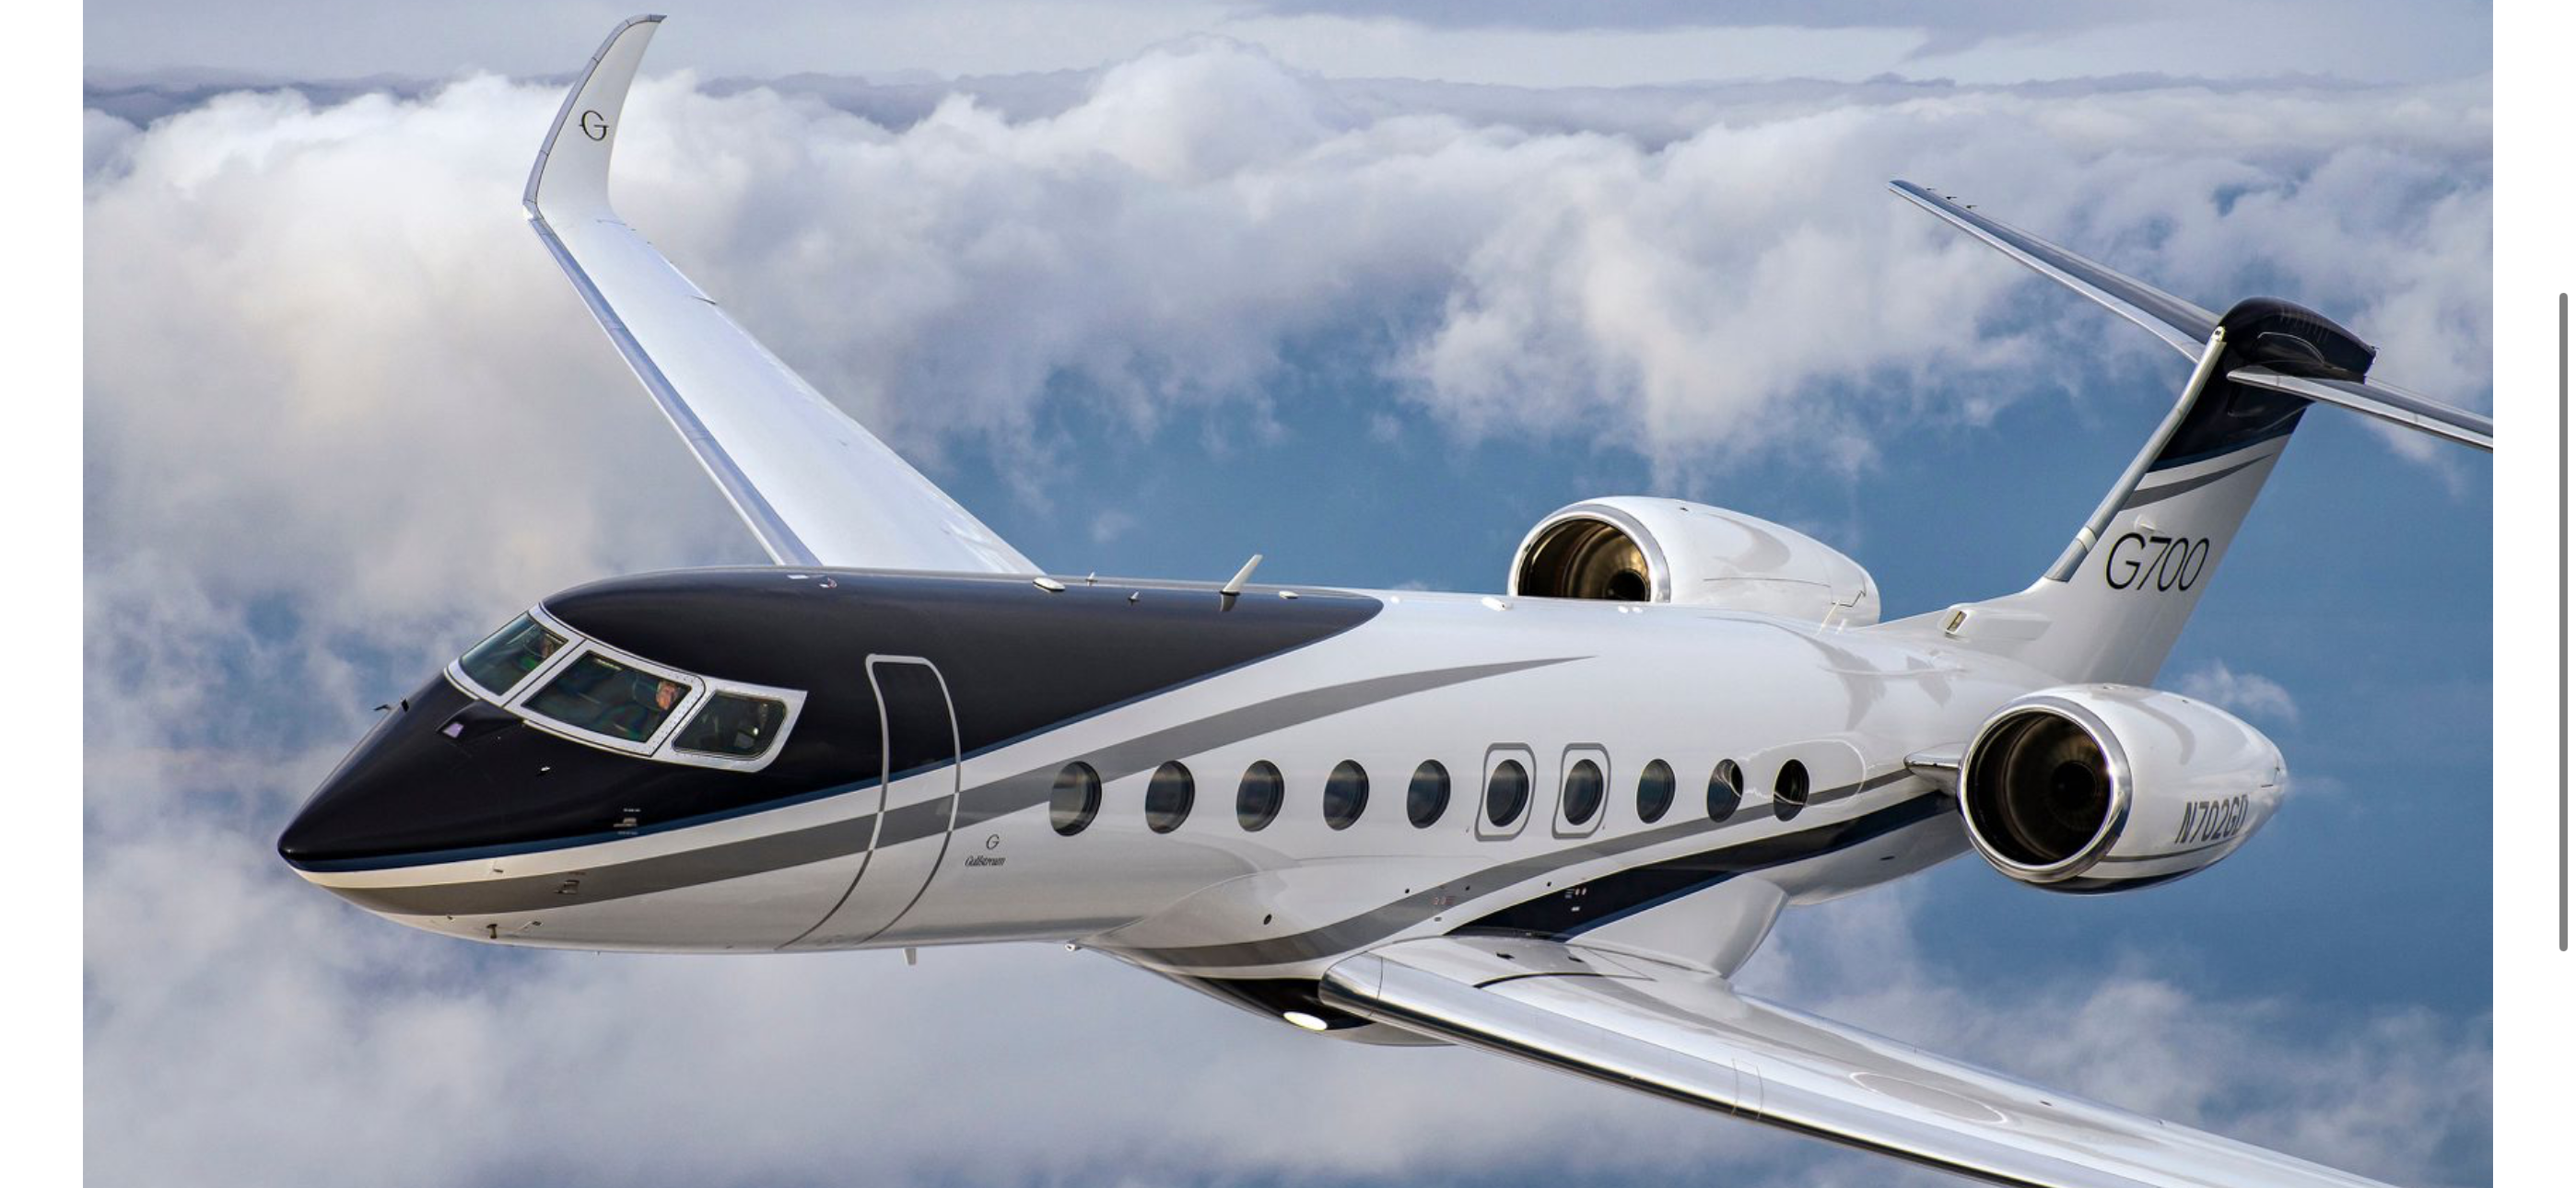 Pic; G700; Private Jet: Airplane